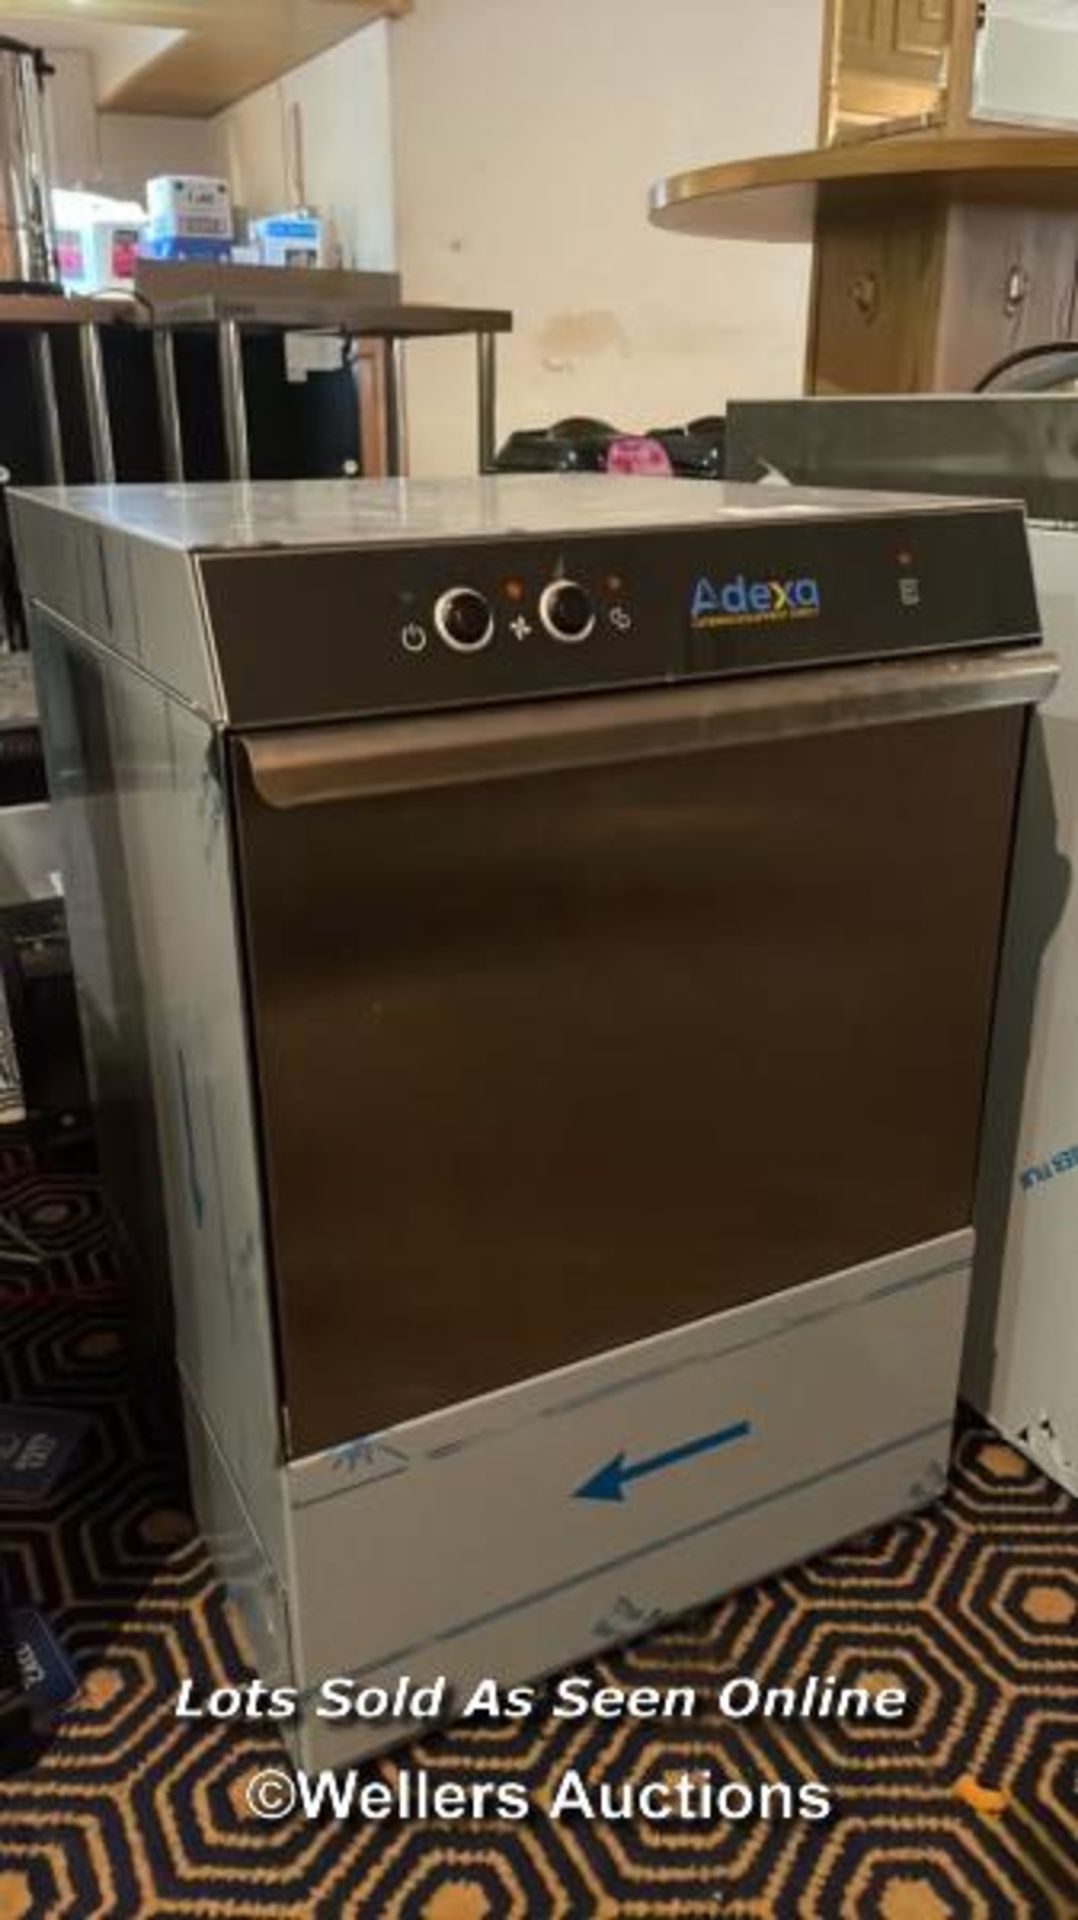 ADEXA ADX40WS COMMERCIAL DISHWASHER, 69.5CM (H) X 47CM (W) X 54CM (D) / COLLECTION LOCATION: OLD